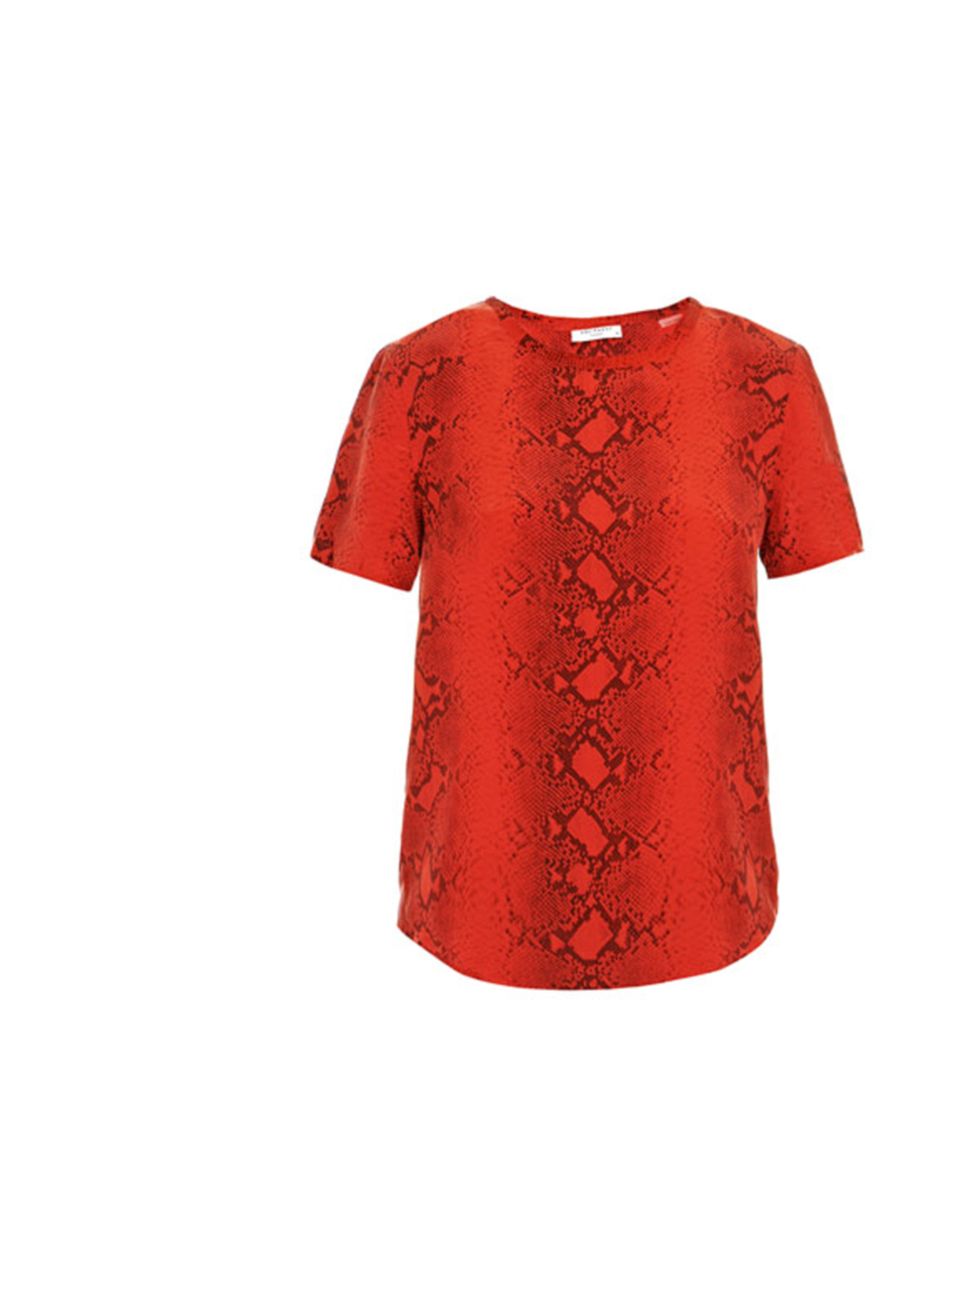 <p>Snake print for the office? Heres how Equipment silk snake-print top, £176, at Matches</p><p><a href="http://shopping.elleuk.com/browse?fts=equipment+snake-print+top+matches">BUY NOW</a></p>